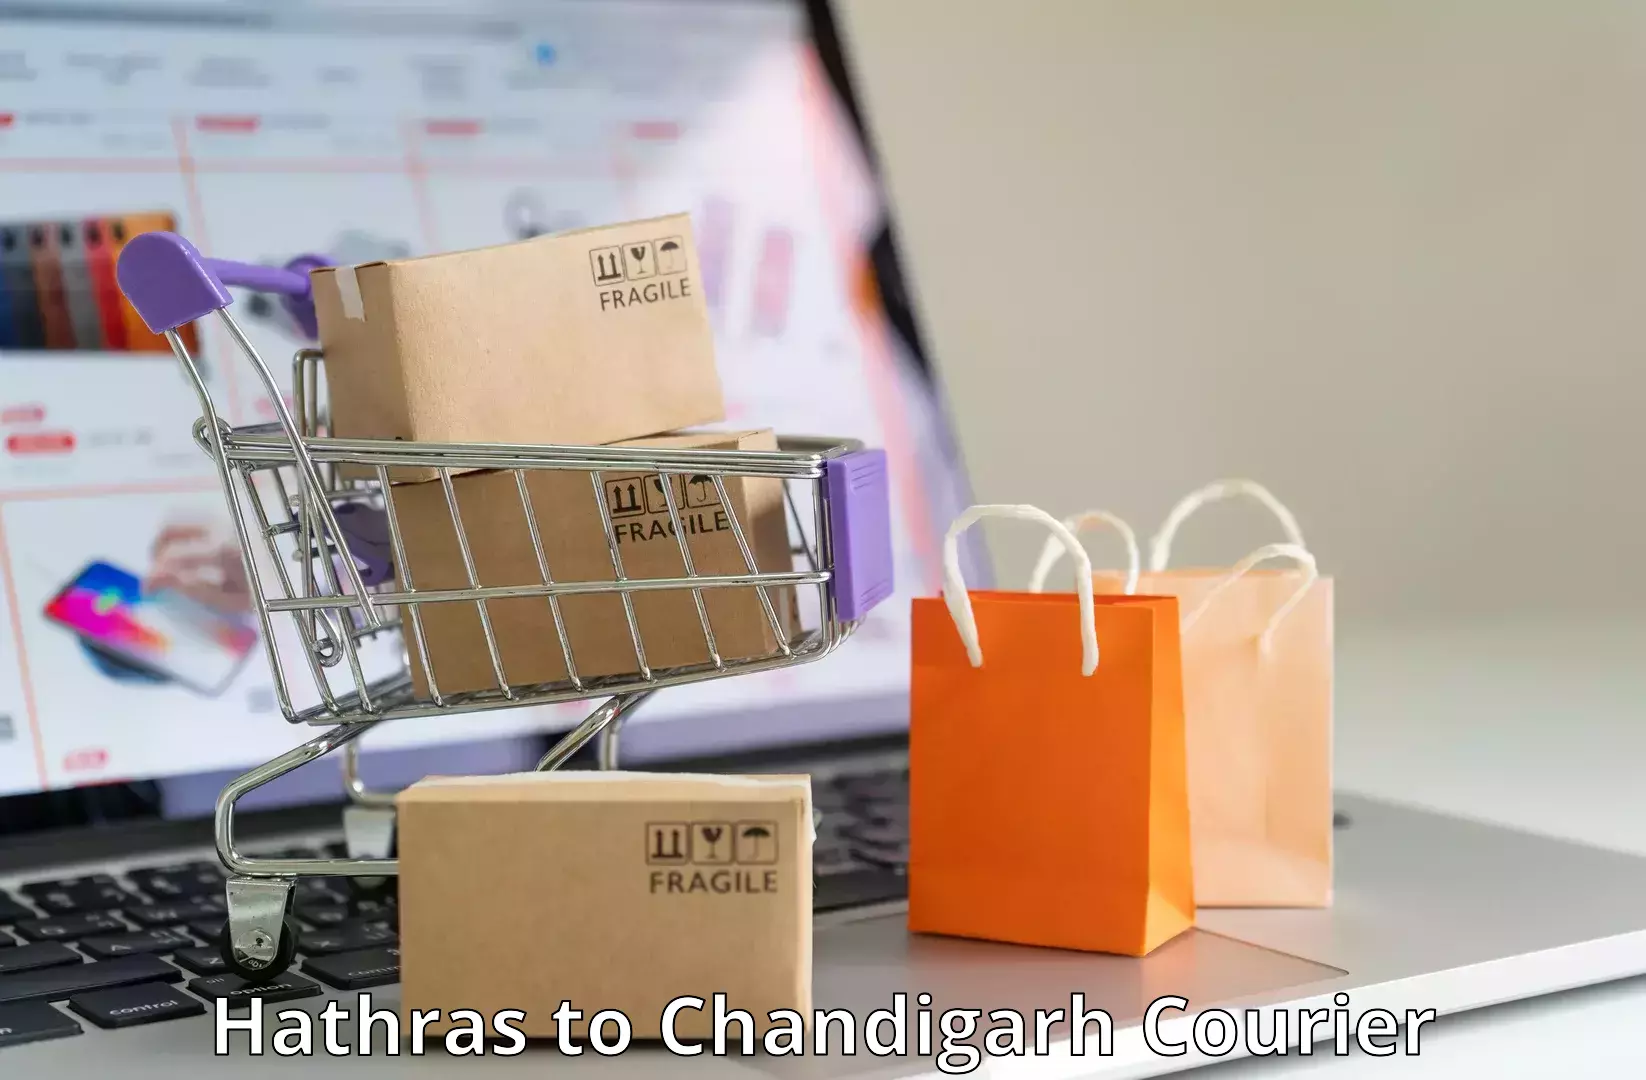 Overnight delivery services Hathras to Chandigarh